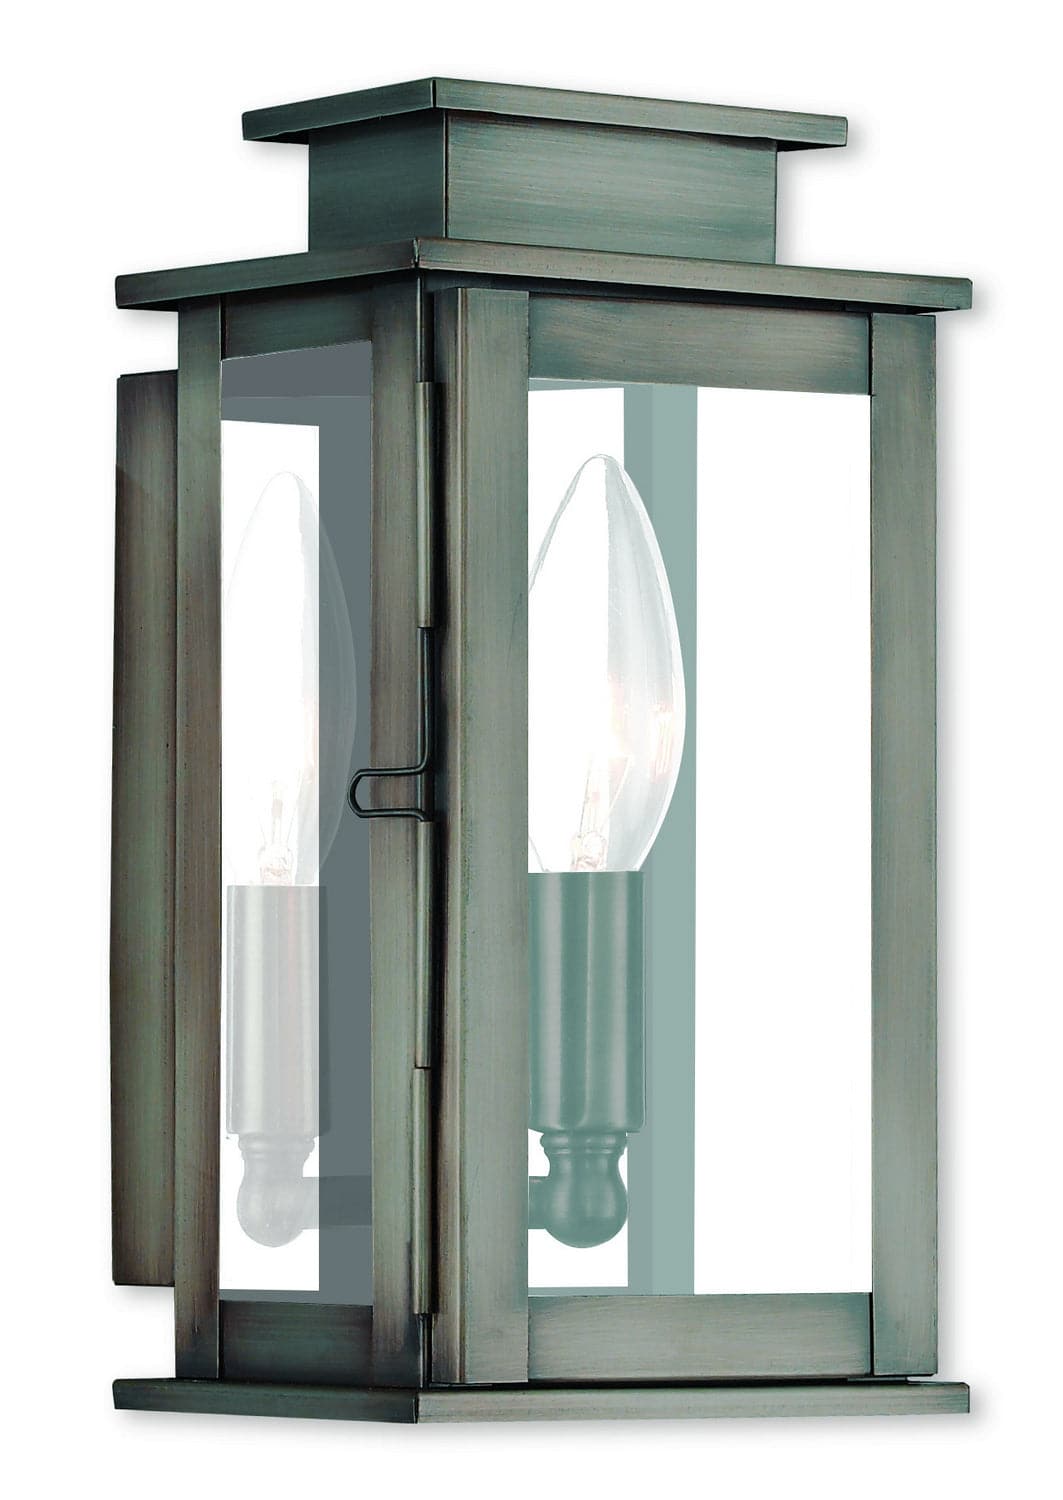 Livex Lighting - 20191-29 - One Light Outdoor Wall Lantern - Princeton - Vintage Pewter w/ Polished Chrome Stainless Steel